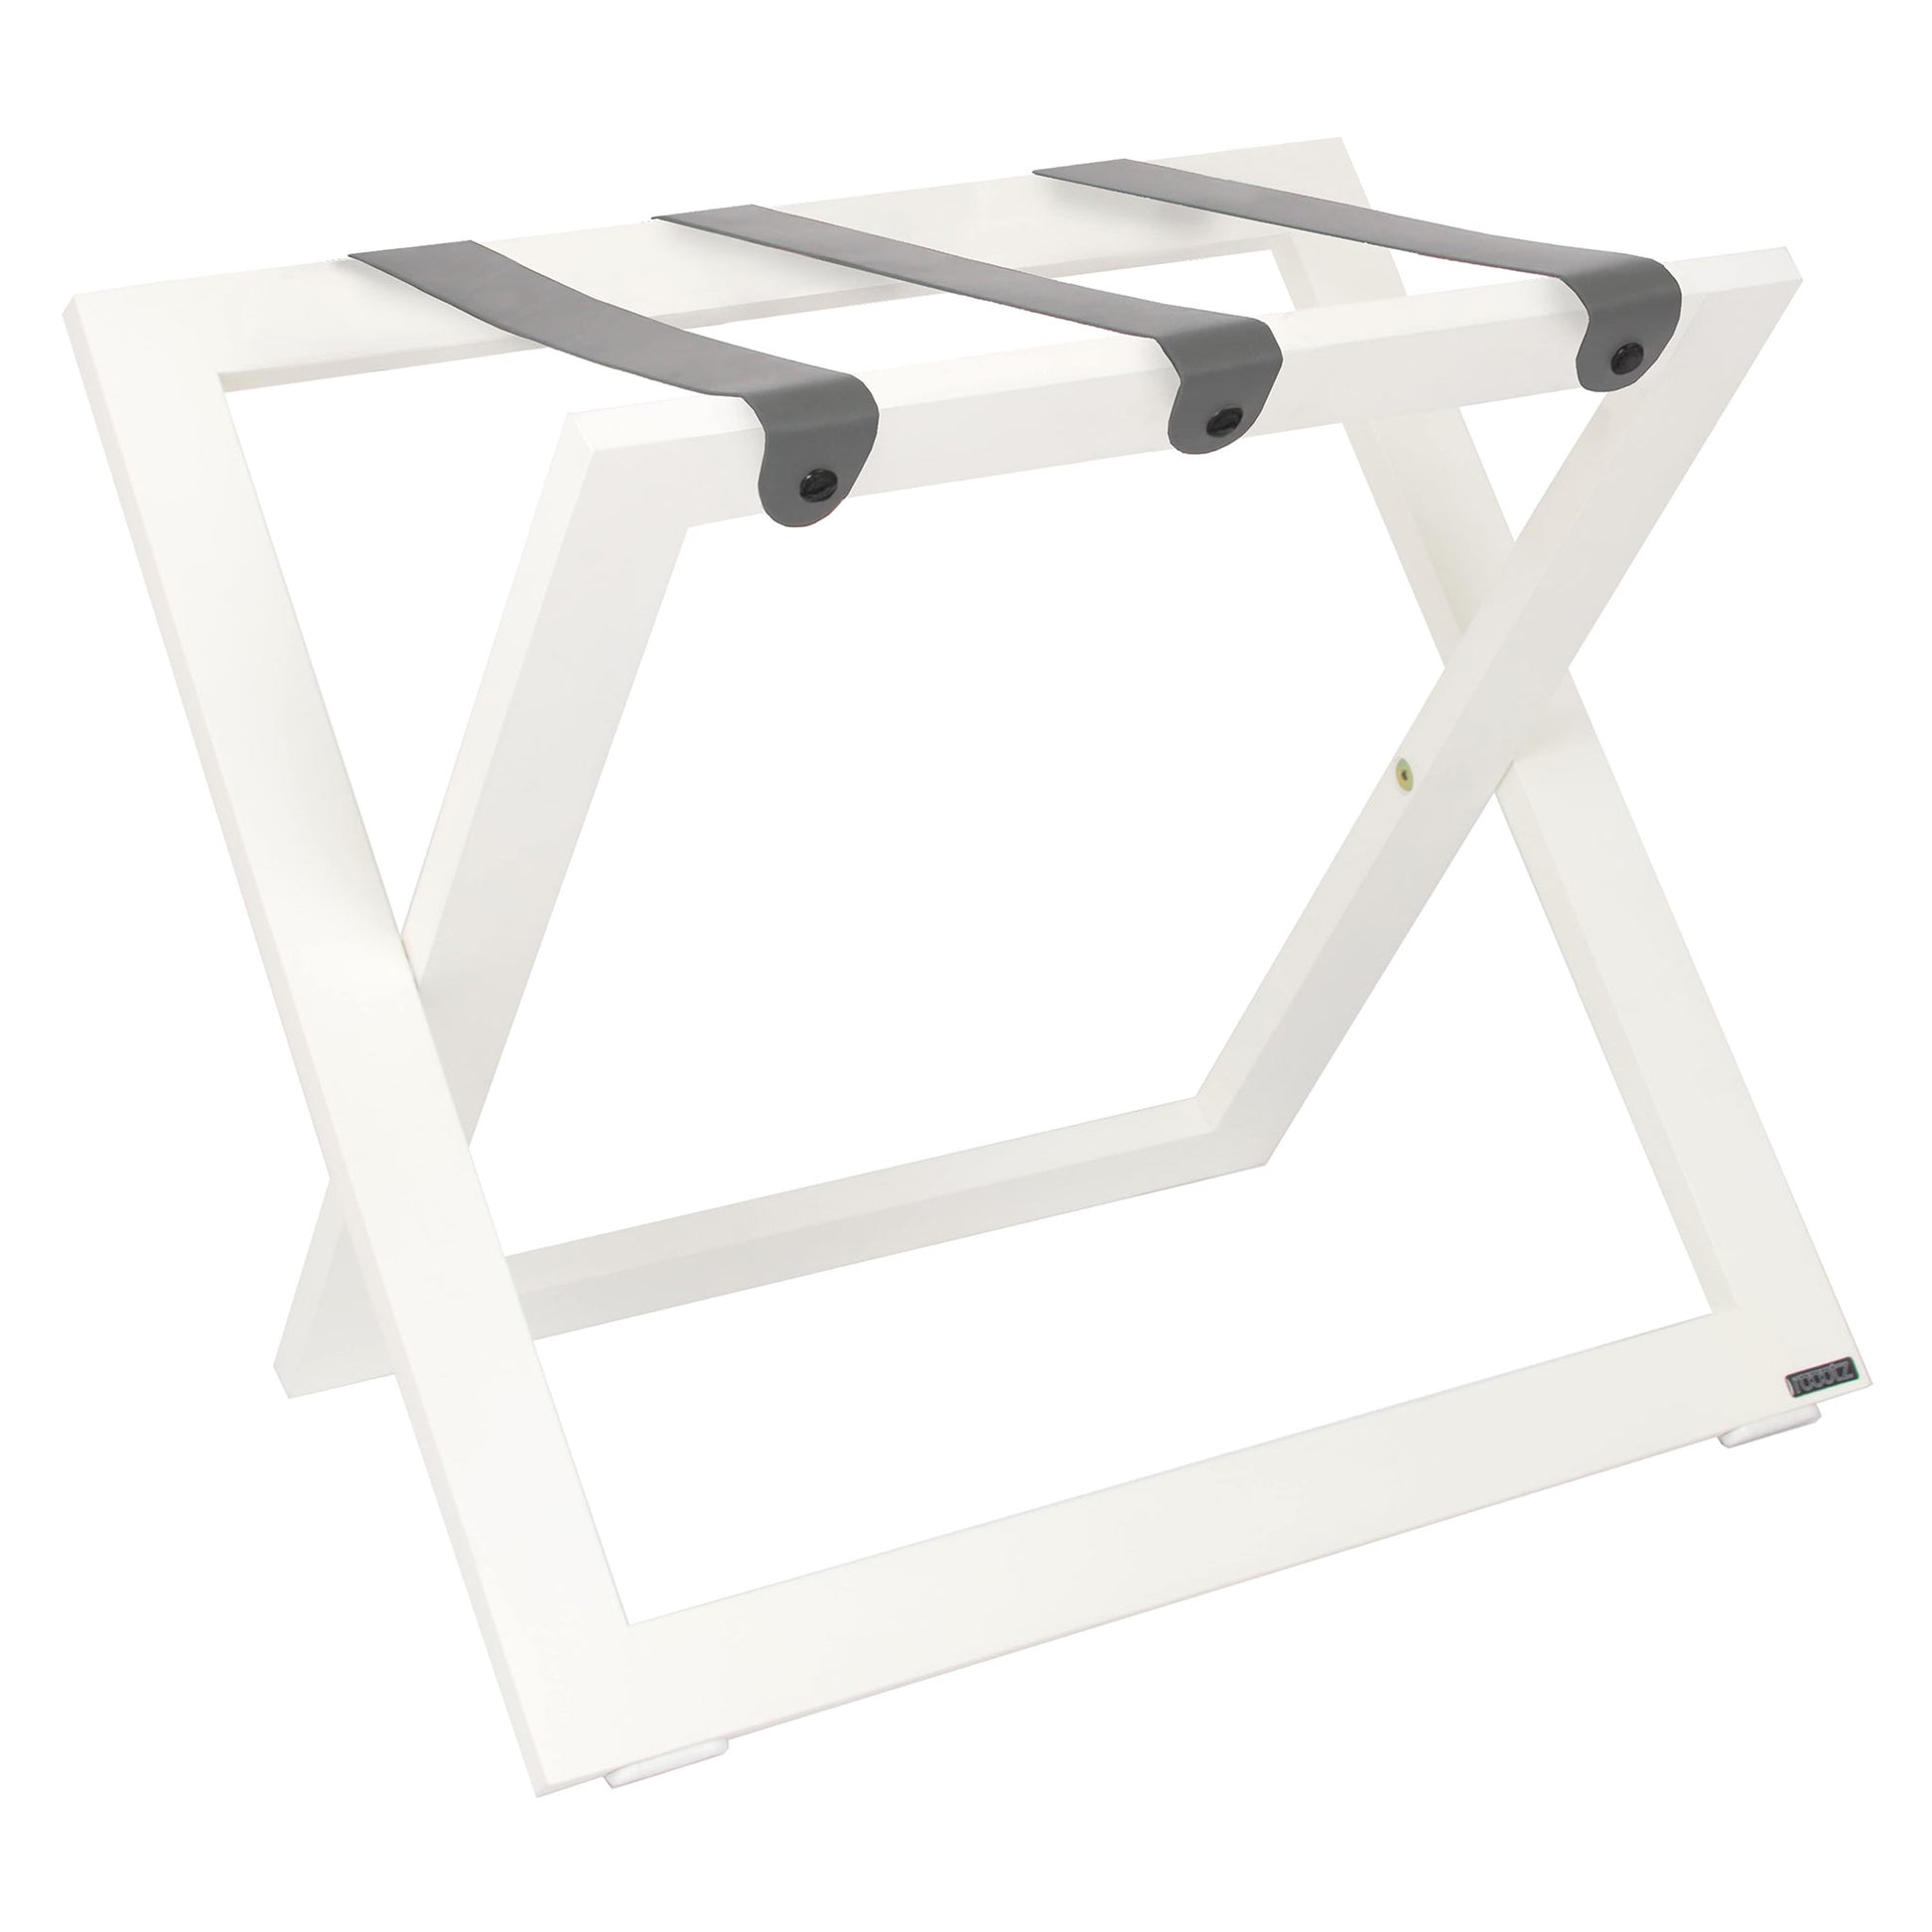 Roootz compact white wooden hotel luggage rack with grey leather straps